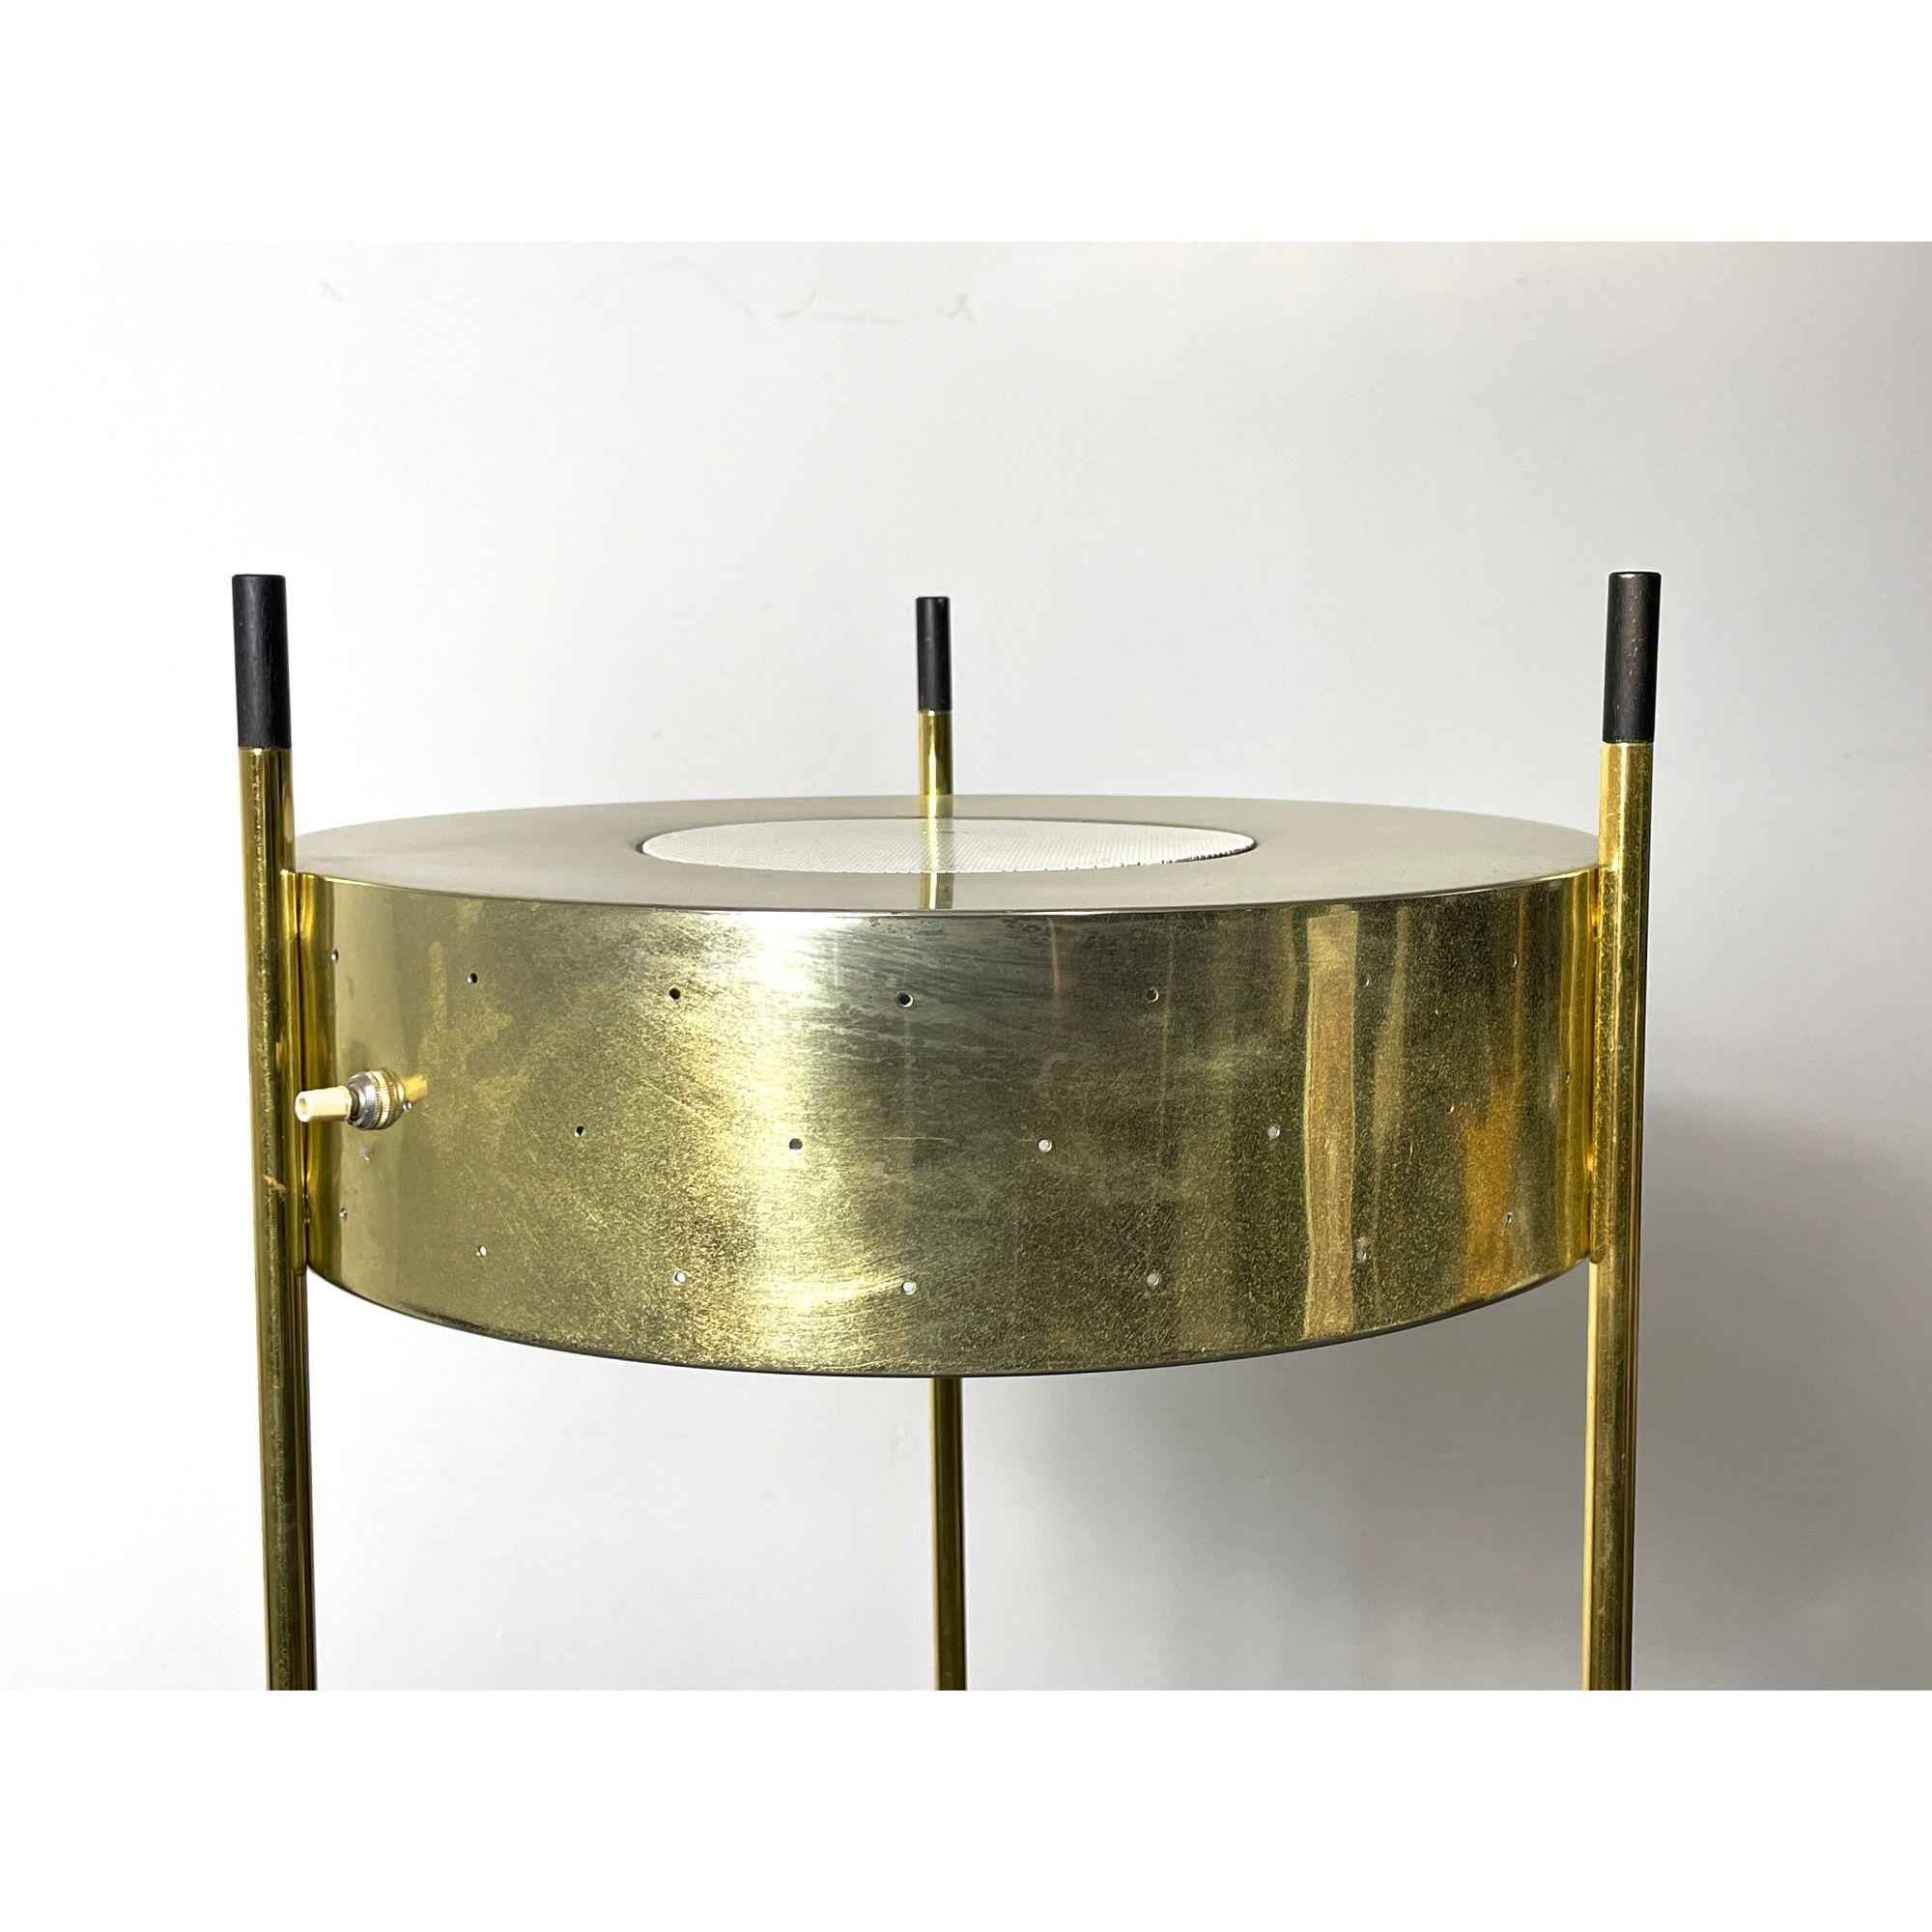 Mid-20th Century Mid Century Modern Vintage Brass Floor Lamp with Shelves by Laurel, circa 1960s For Sale